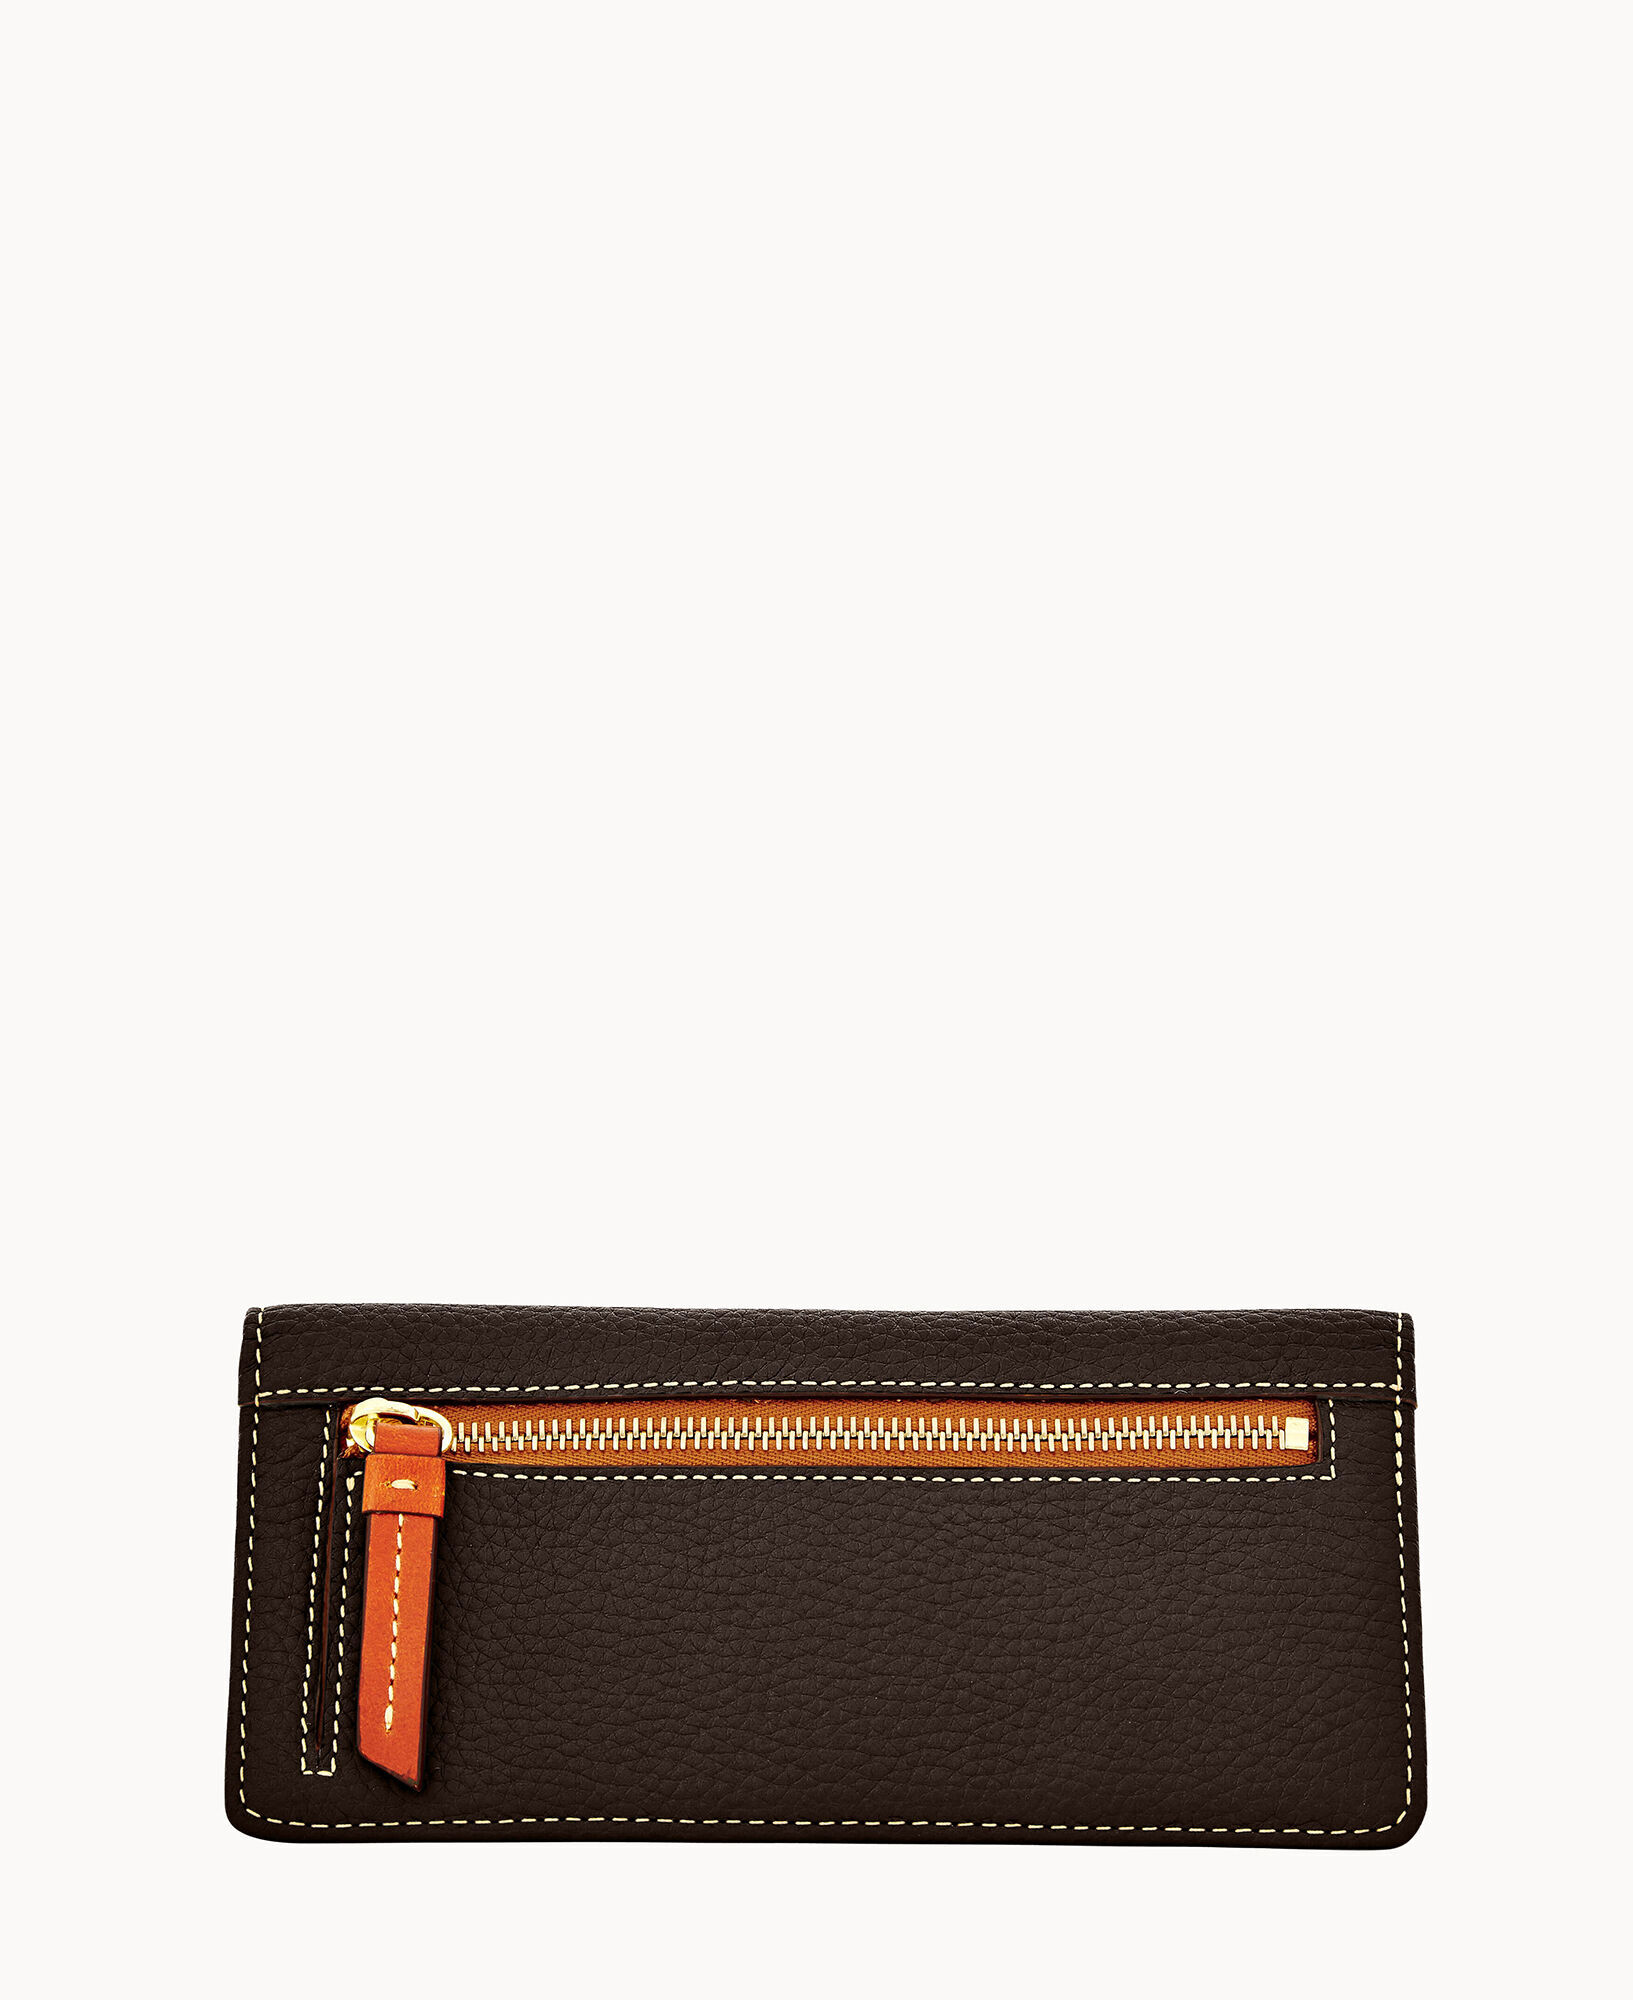 Looking to buy my first designer chain wallet since I've always